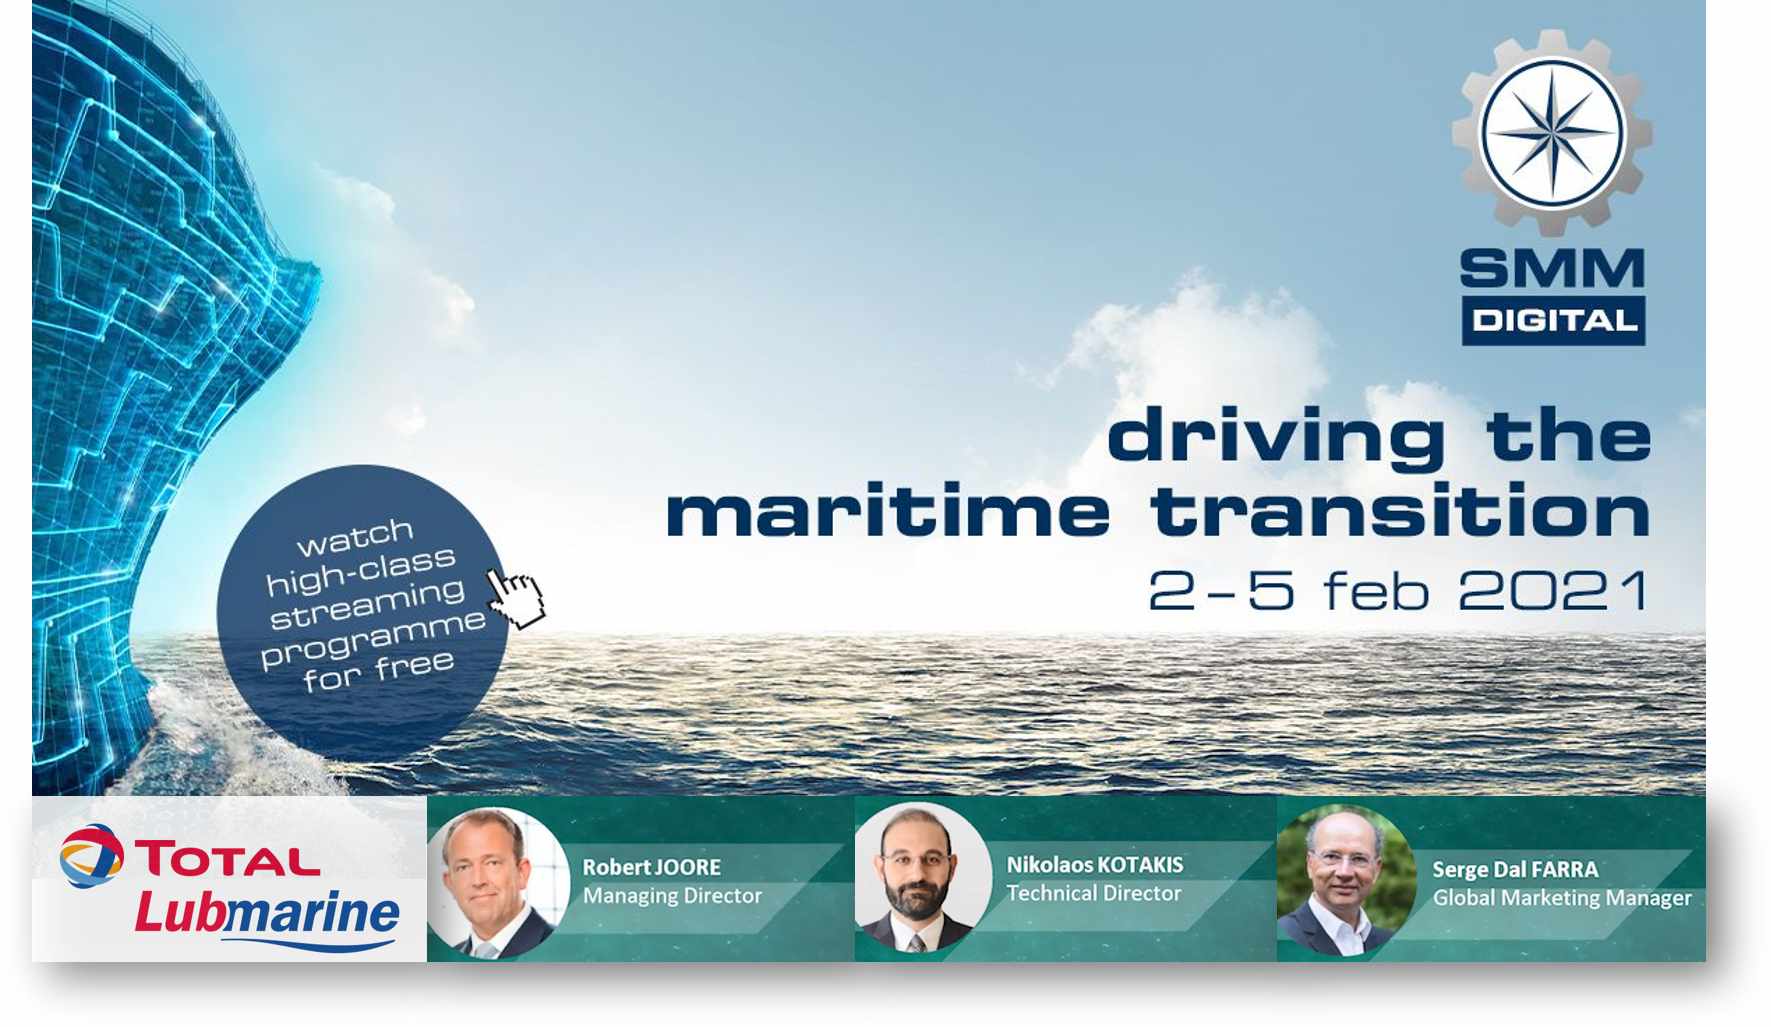 ‘Driving the maritime transition’ – the theme of the 2021 SMM DIGITAL event, 2-5 February 2021